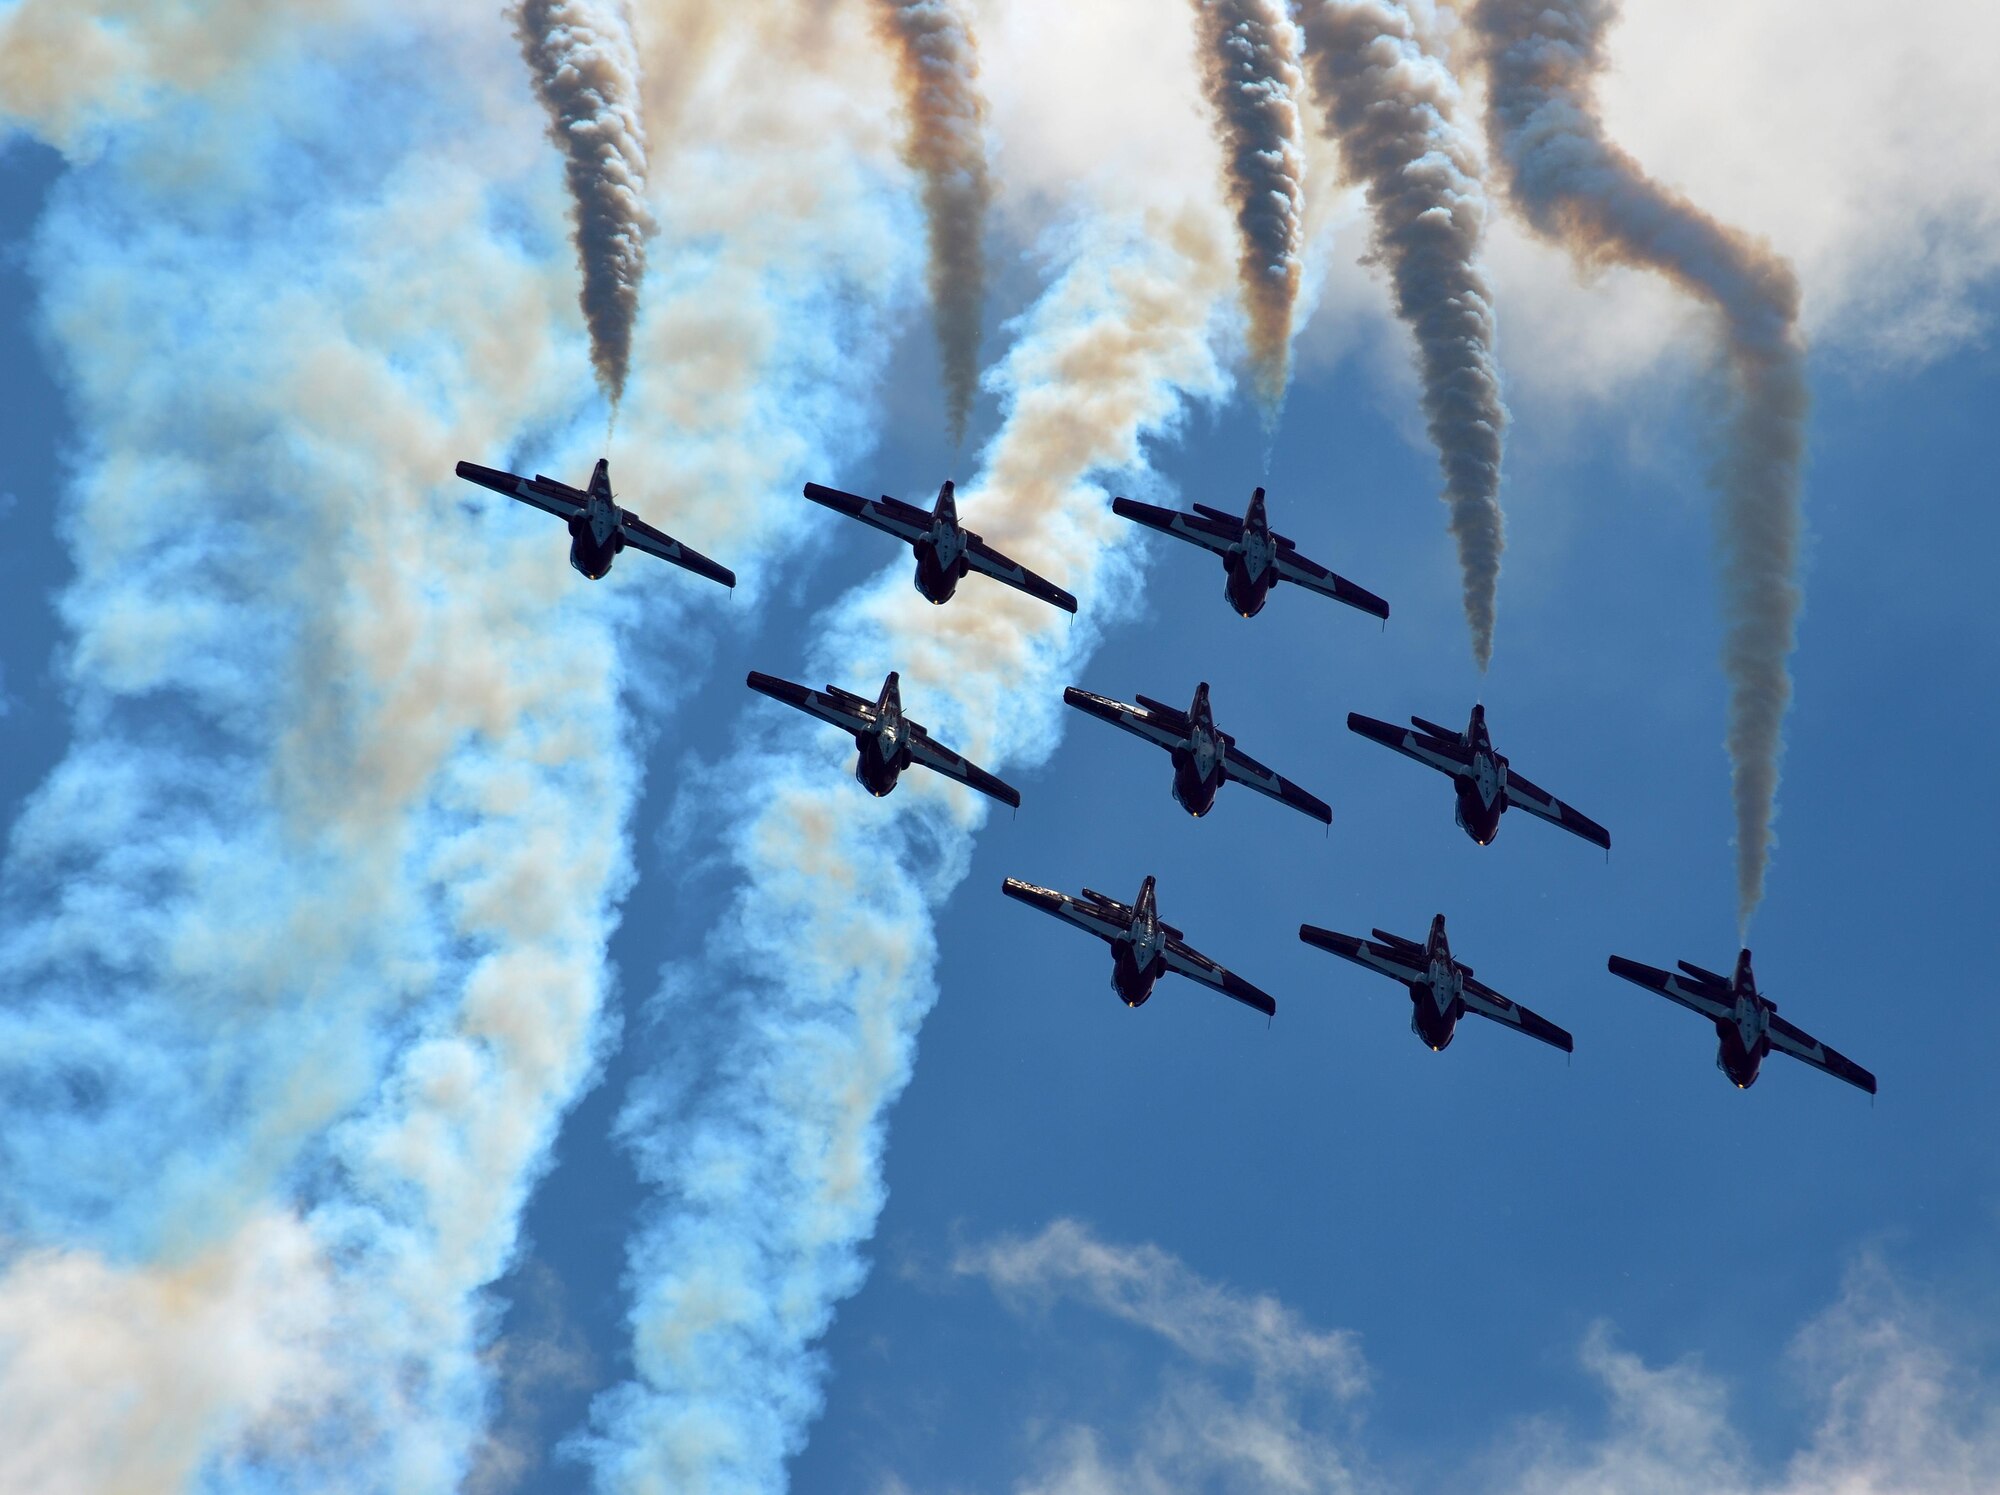 Nearly 400,000 spectators came to Westover Air Reserve Base to watch the 2015 Great New England Air Show, boasting more than two dozen current and vintage military aircraft. Aerial demonstration teams included the U.S. Navy Blue Angels, Canadian Snowbirds, U.S. Army’s Golden Knights parachuting team, F-22 demo team, Geico Skytypers, and Canadian CF-18 team. (U.S. Air Force photo/SSgt. Kelly Goonan)